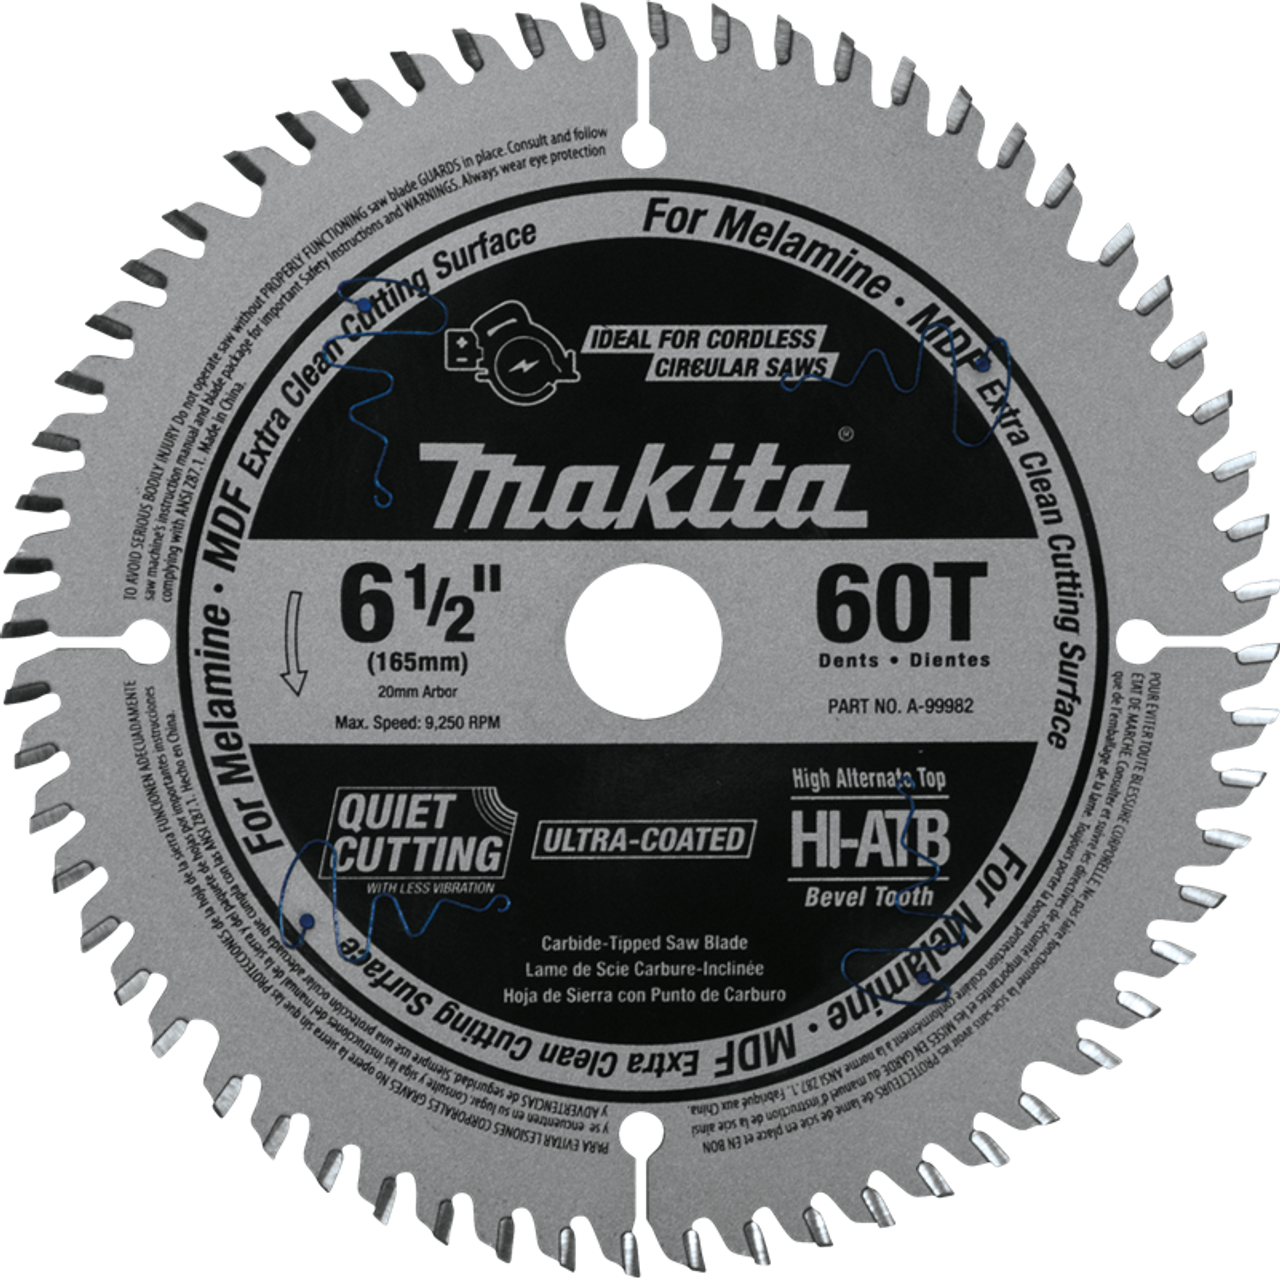 which circular saw blade for mdf?